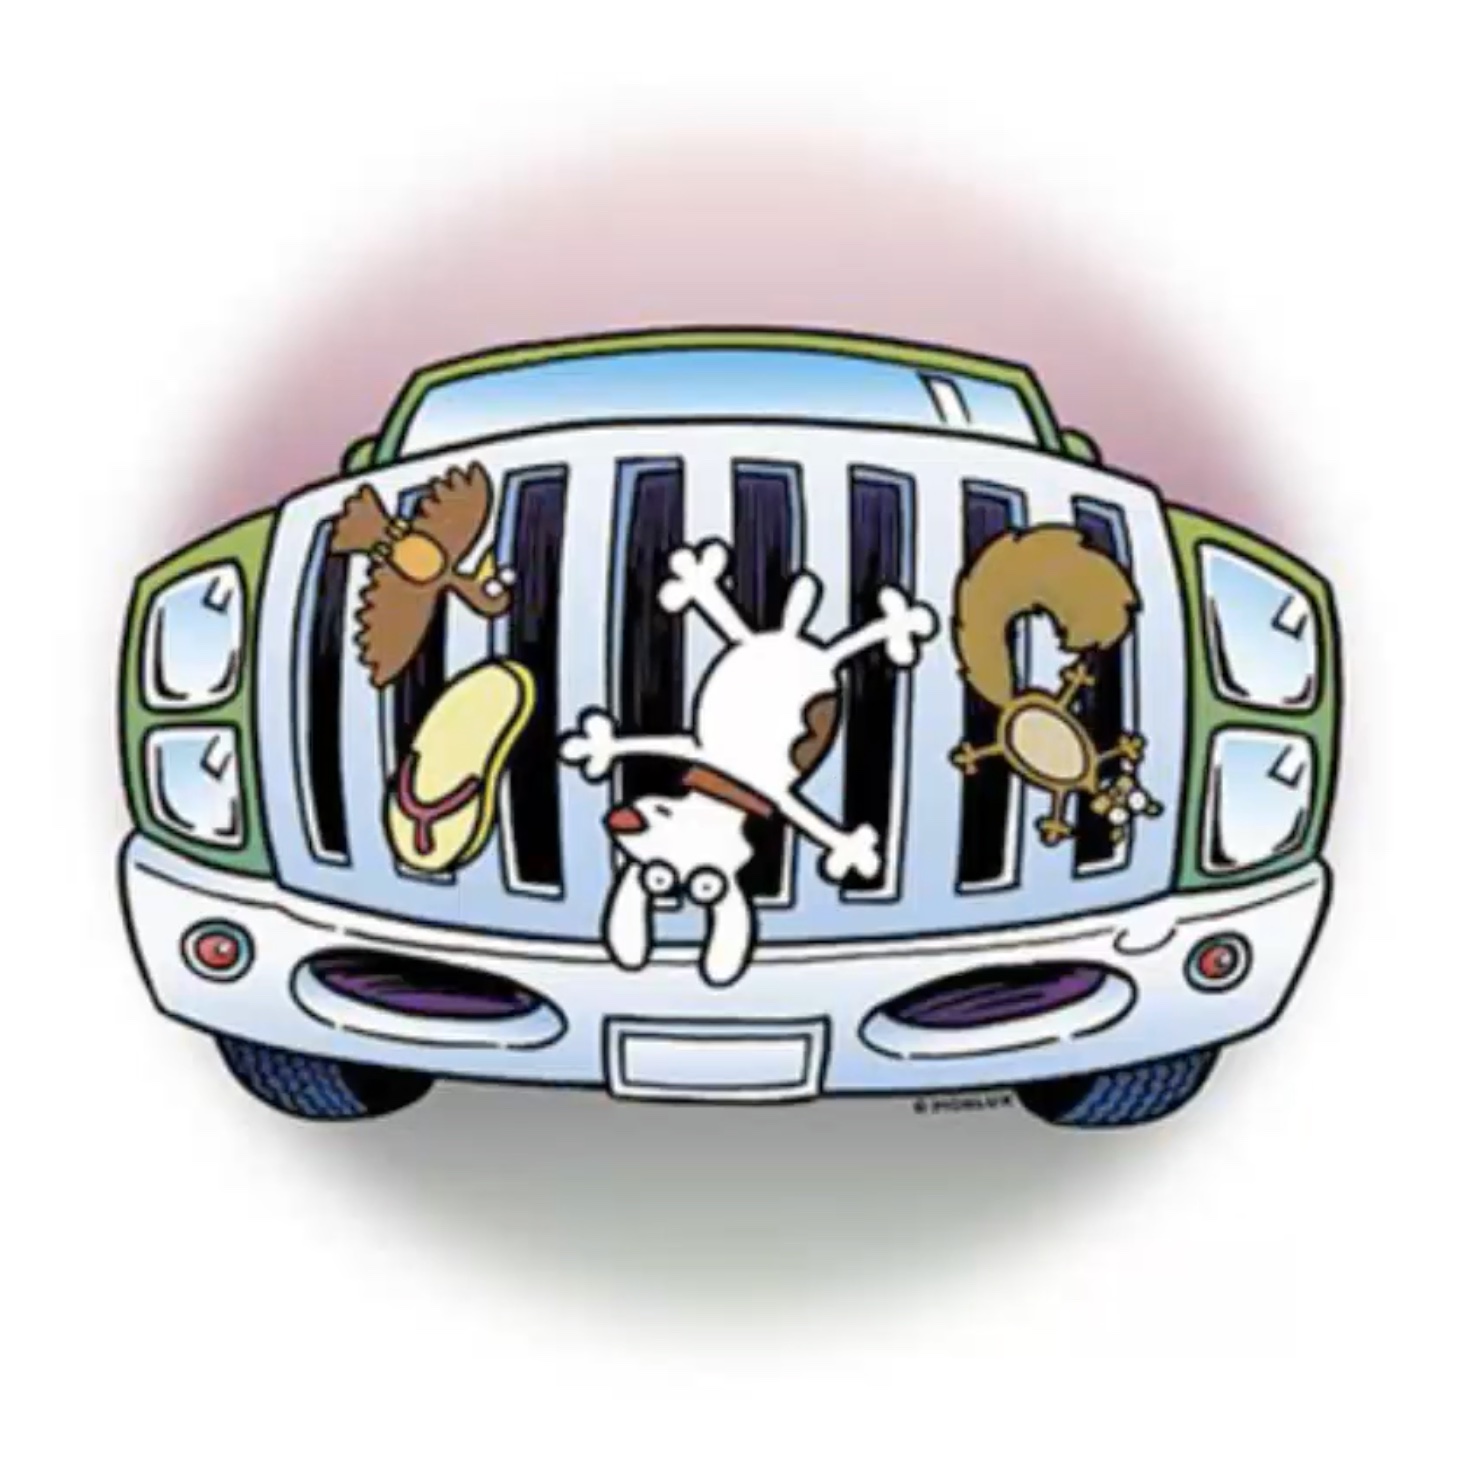 screenshot from the webinar showing a dog stuck on a car grill